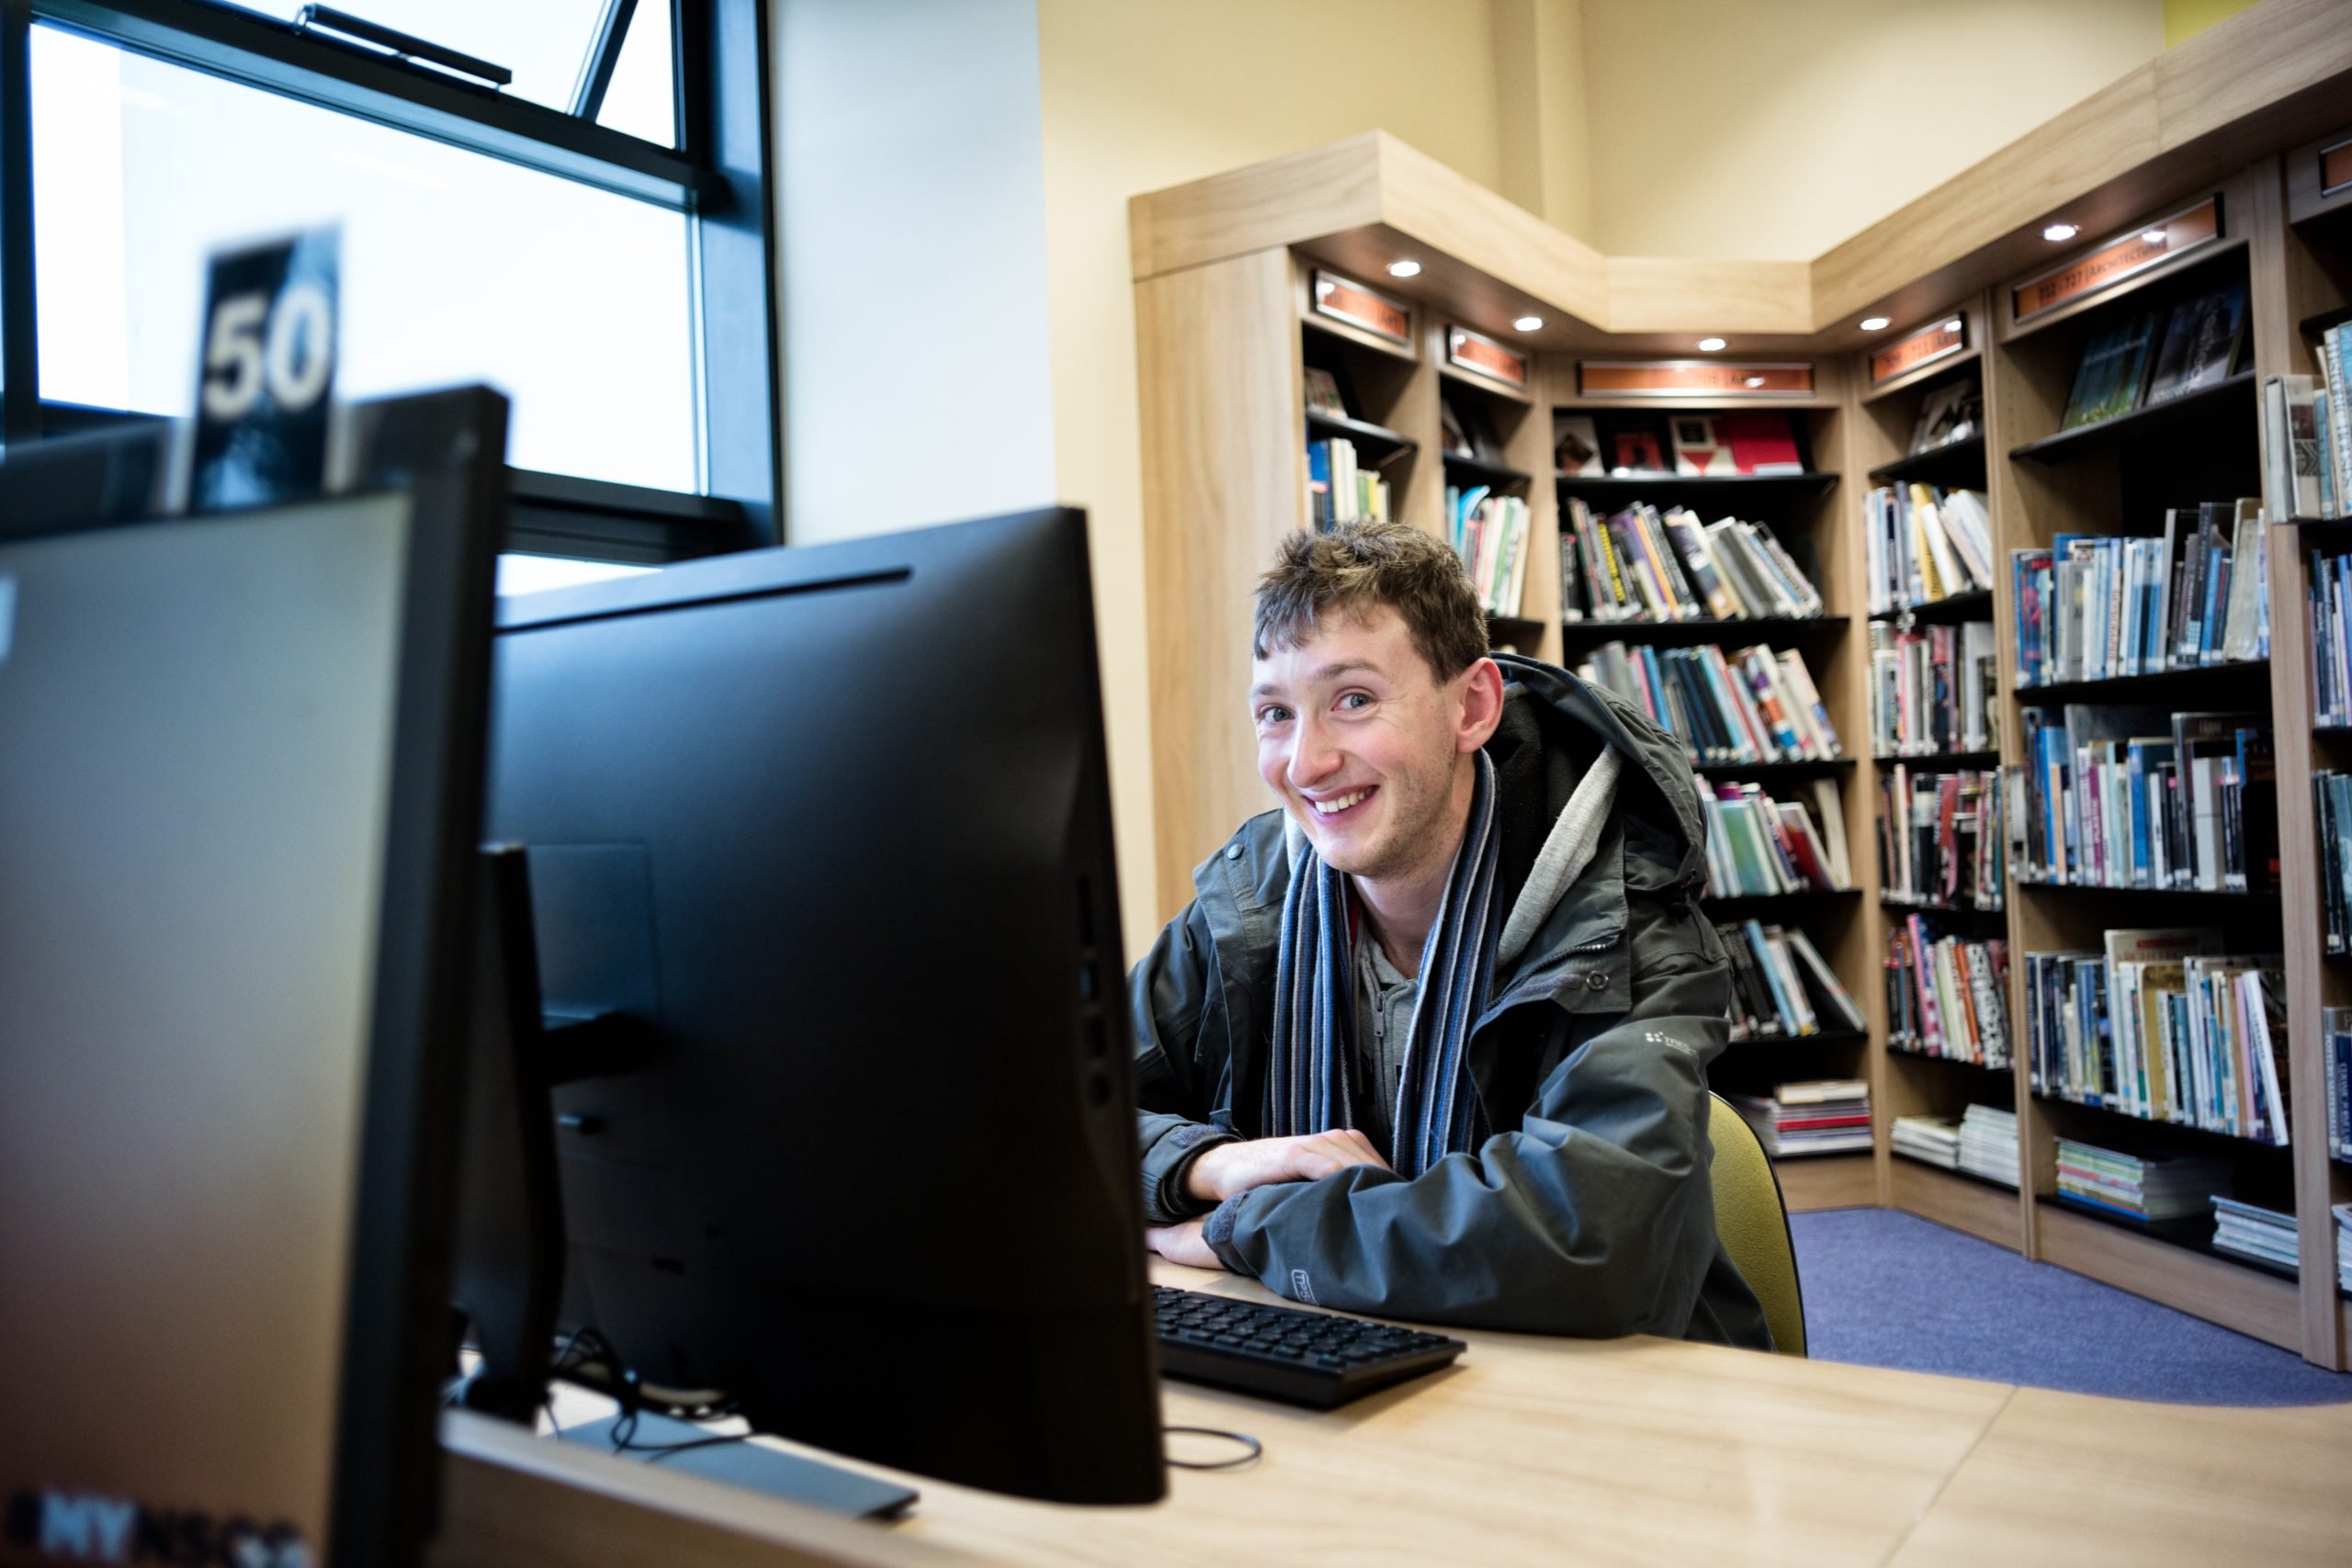 Young man siting at computer in library